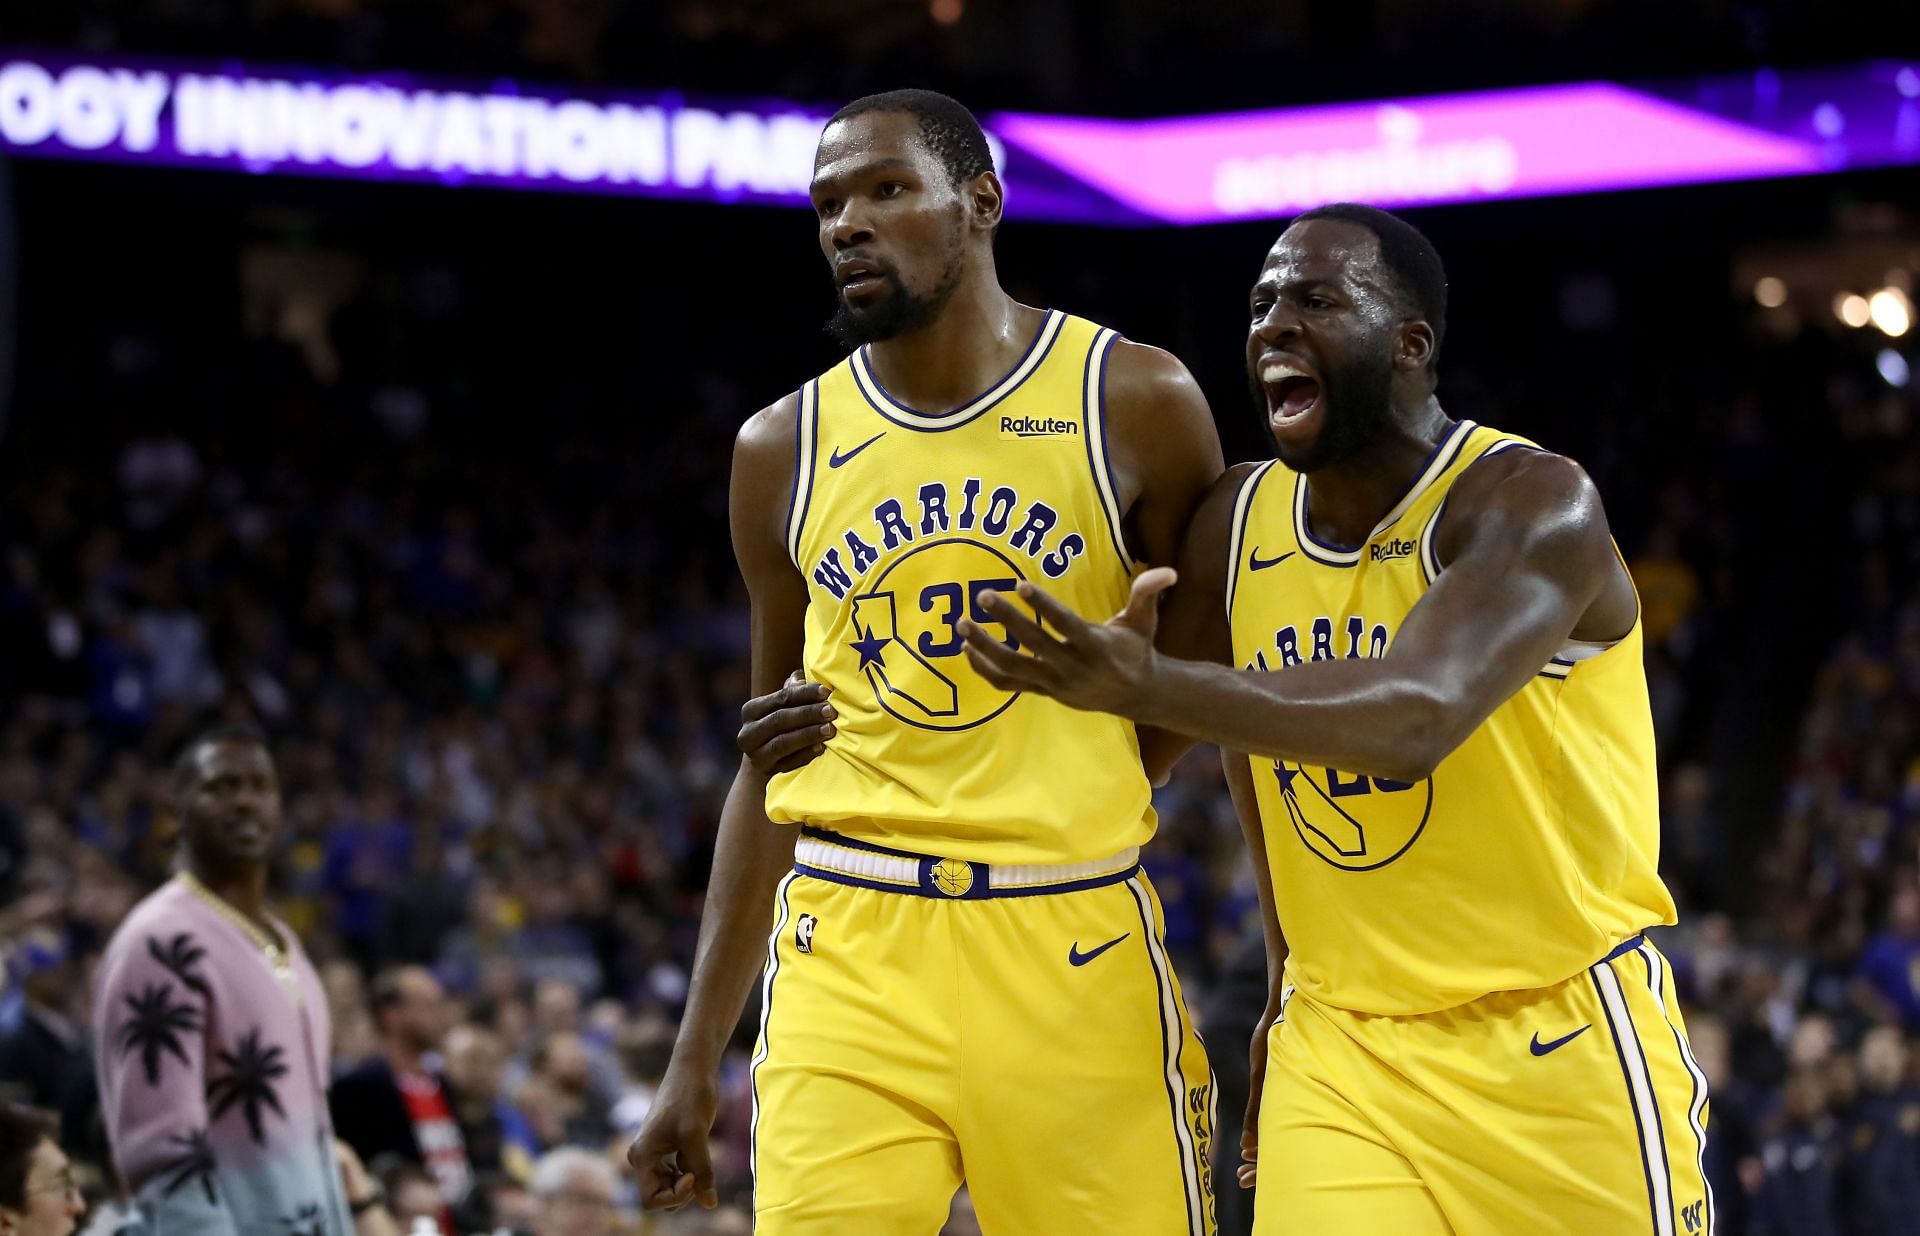 Draymond Green sticks up for Kevin Durant.